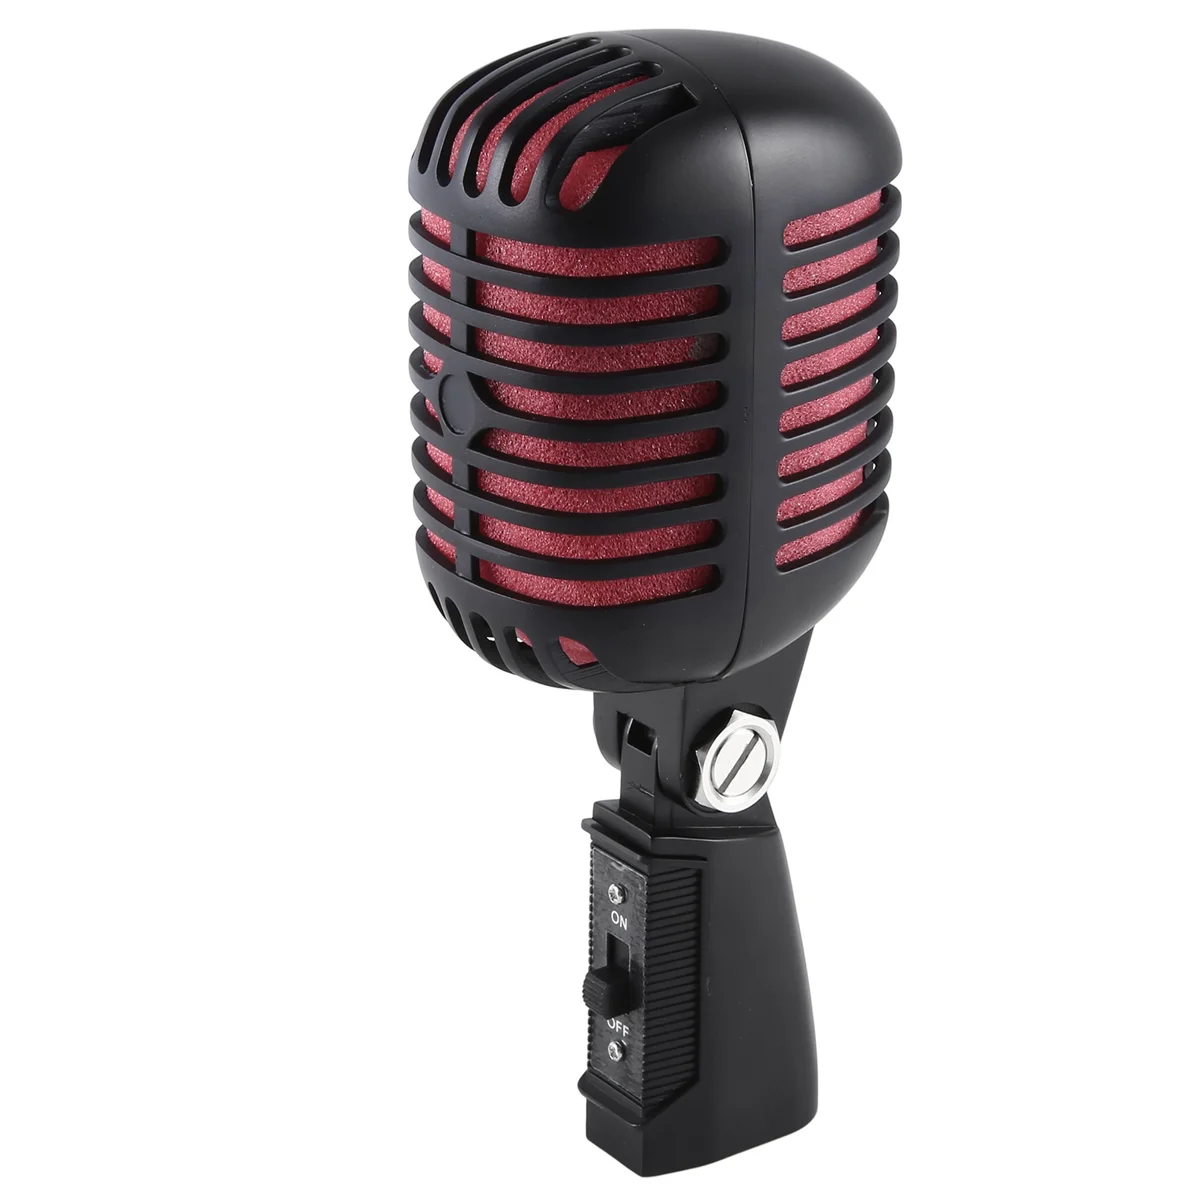 

Professional Classic Retro Dynamic Vocal Microphone,Metal Swing Mic, for Live Performance Karaoke